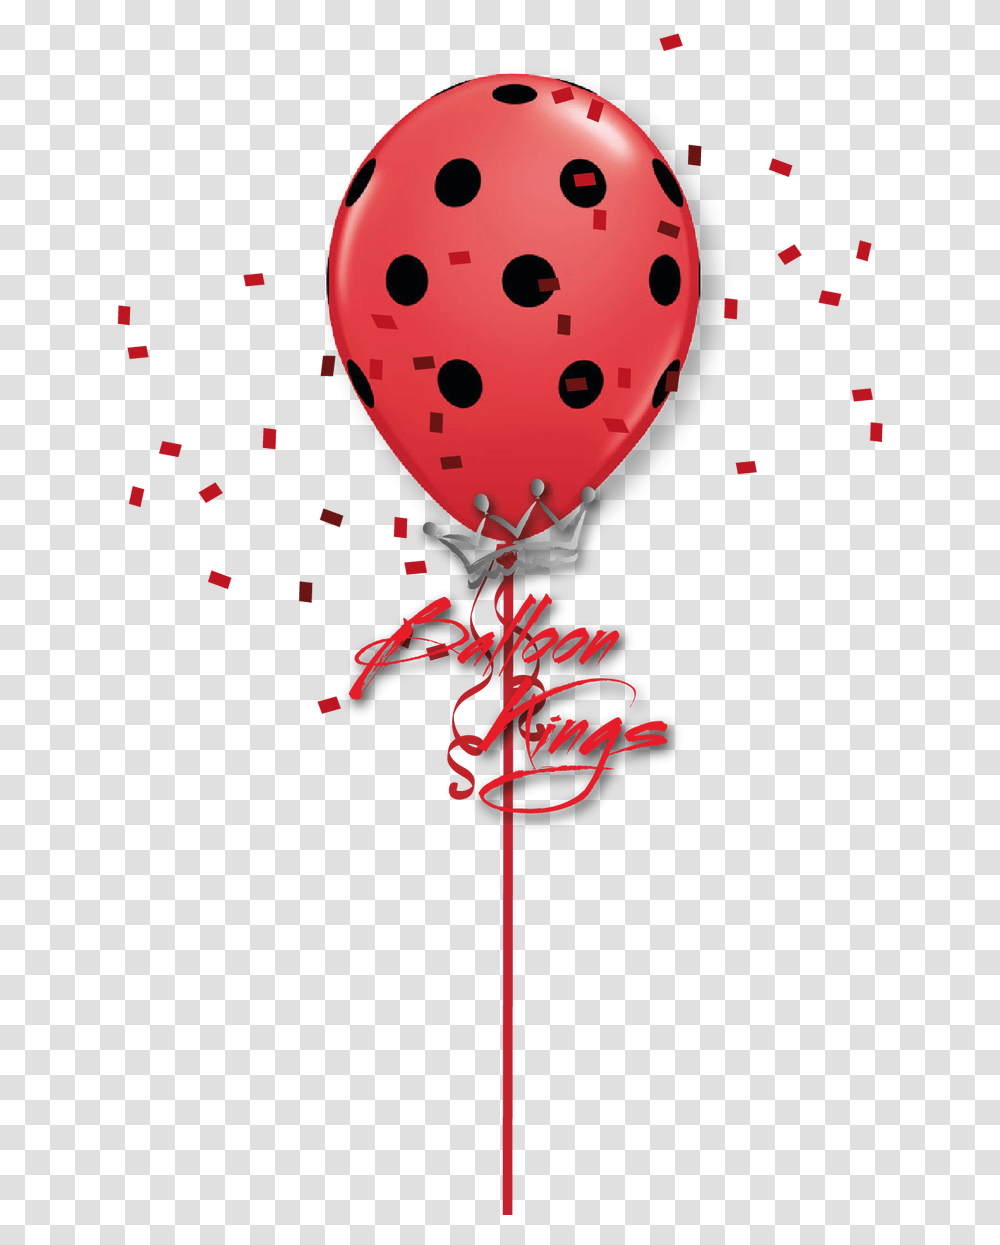 Red And Black Polka Dots Balloon, Paper, Confetti Transparent Png